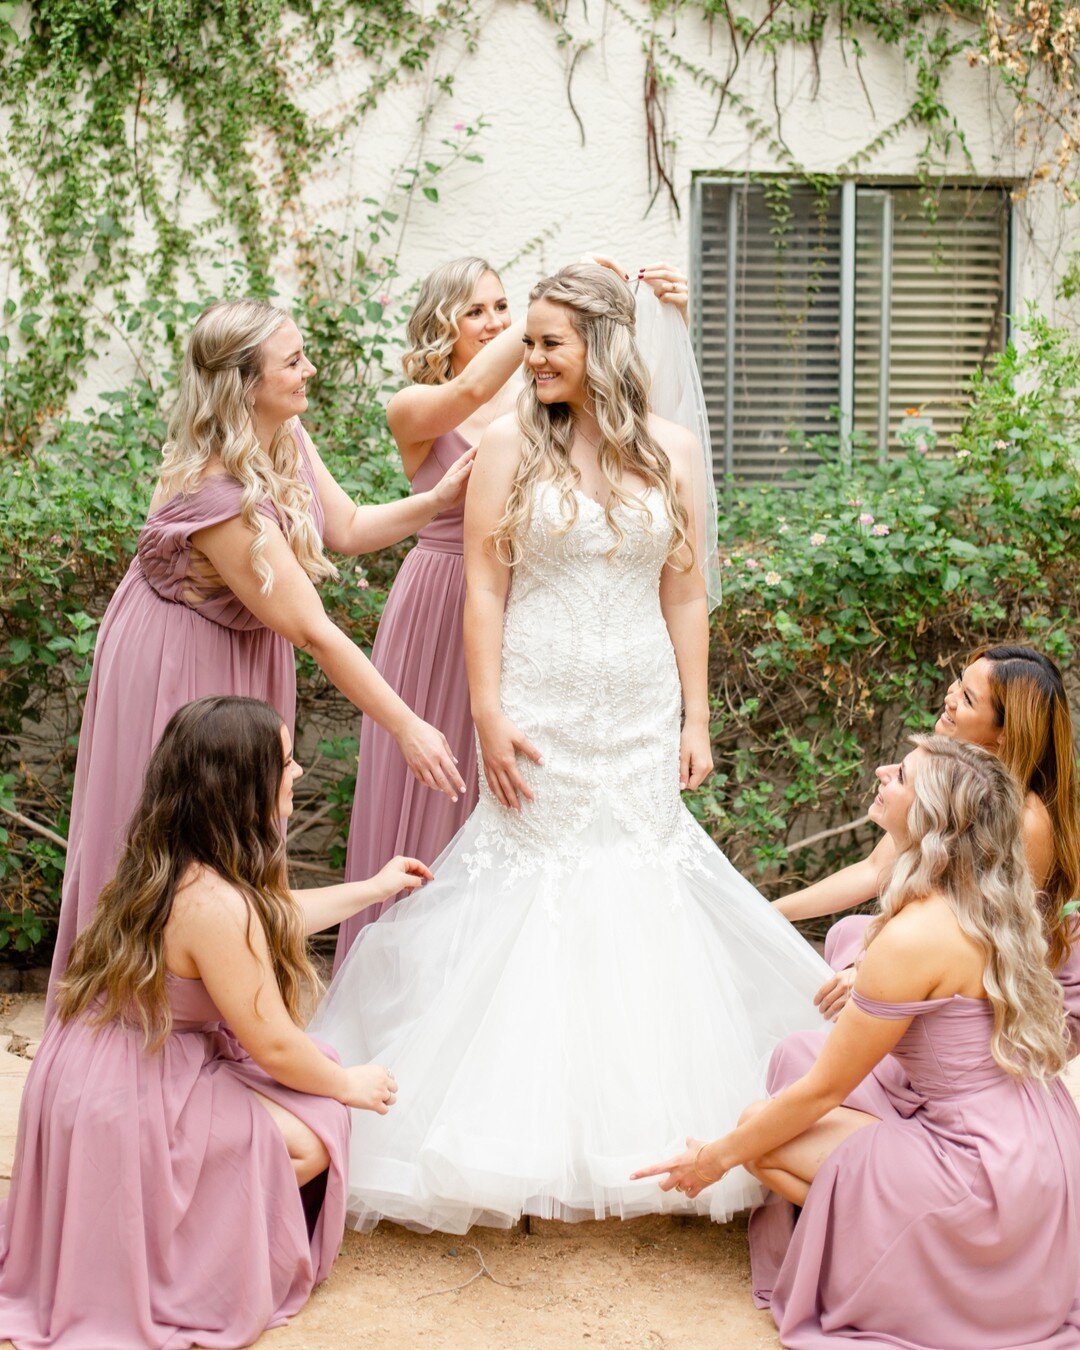 We're all here to celebrate the bride and groom, but we like to take a moment to remember their friends too. 😊​​​​​​​​​
Artist: Gabi &amp; Brianna
Level: Gold
Photographer: @camifacephotography

#scottsadalemakeupartists #Scottsdaleweddings #Scottsd